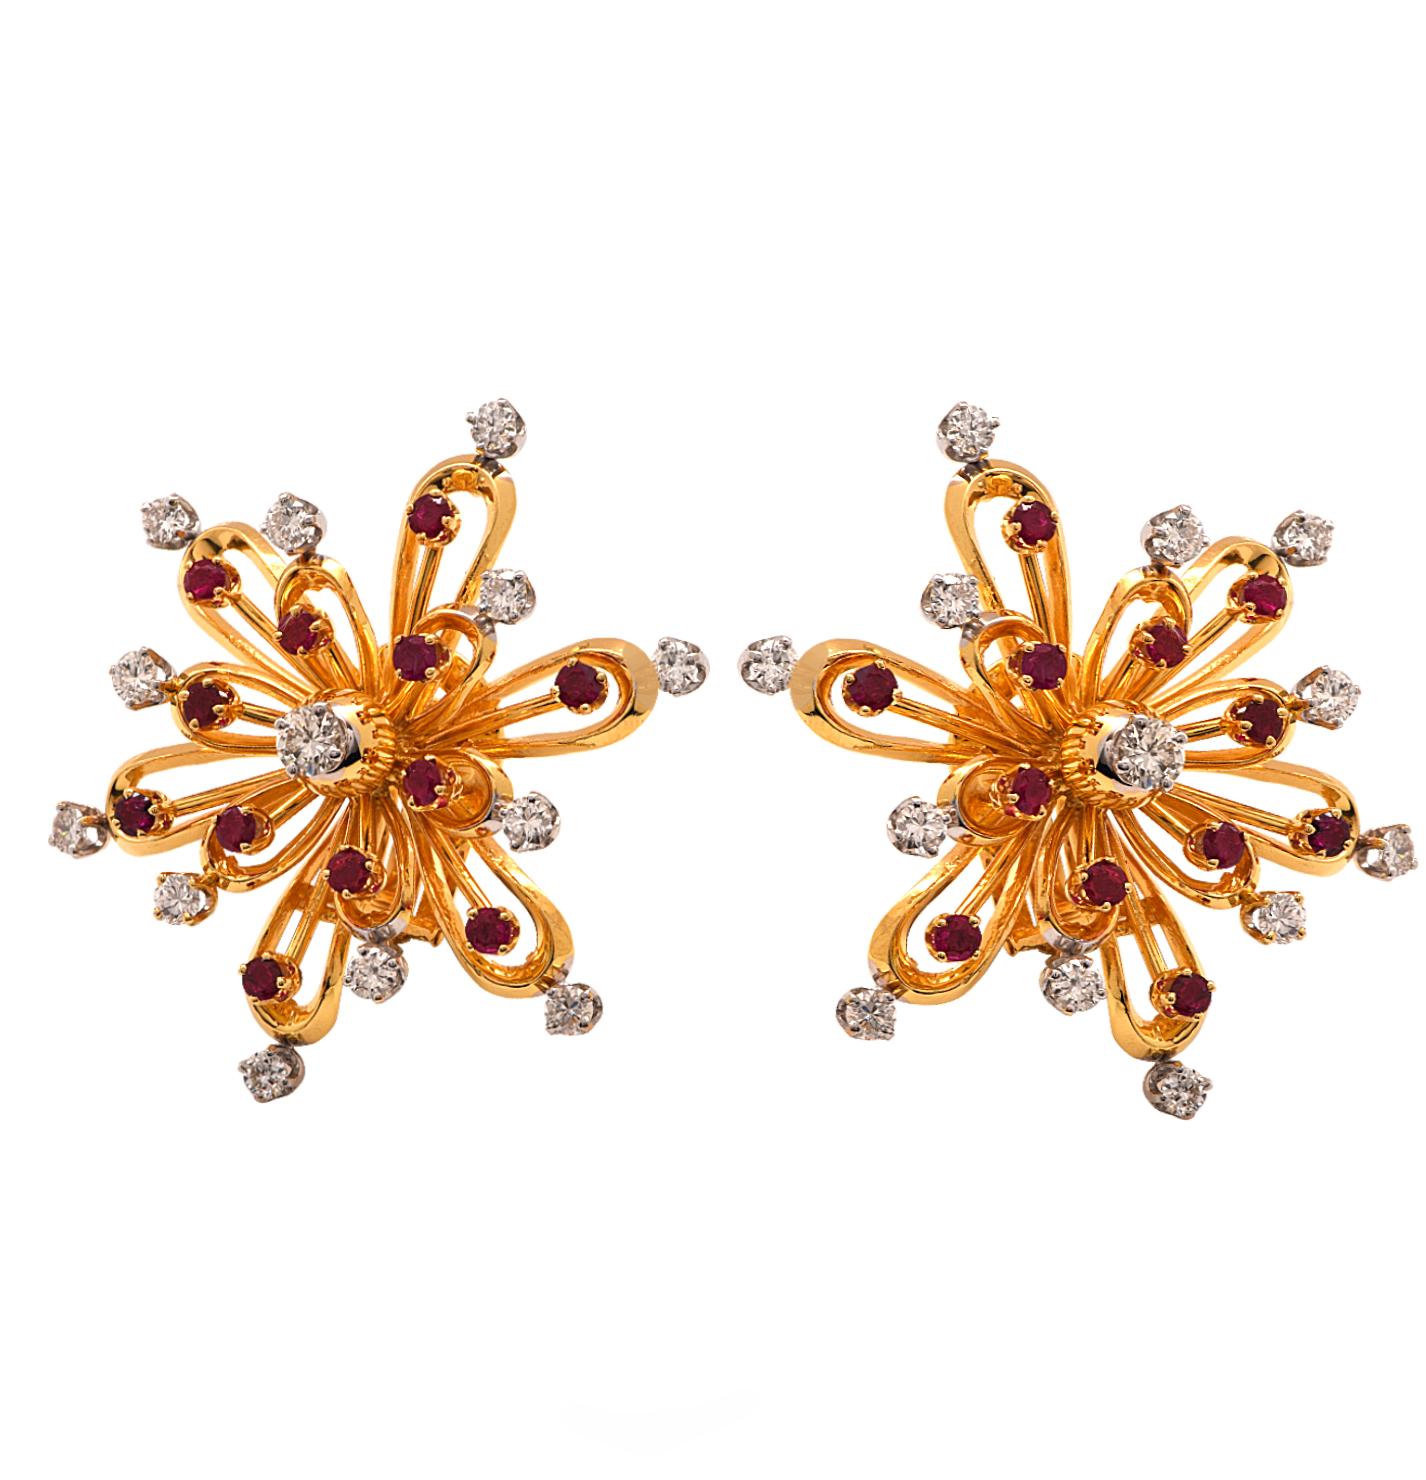 From the House of Van Cleef & Arpels, these exquisite earrings, finely crafted in 18 Karat yellow Gold, feature two delightful flowers embellished with 26 round brilliant cut diamonds weighing approximately 2.35 carats, G color, VS-SI clarity, and